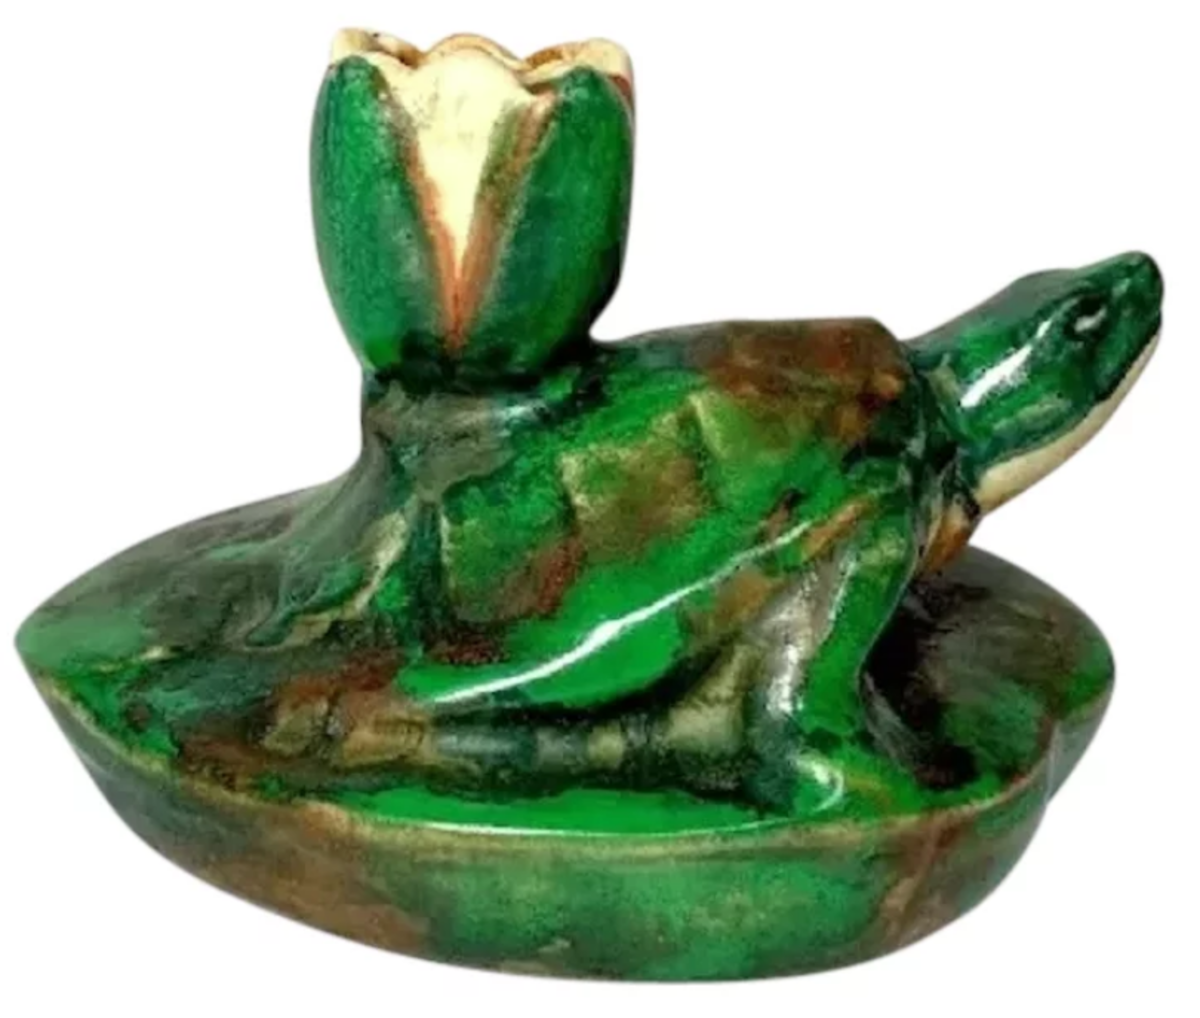 Coppertone turtle and lotus blossom candle holder; $395.